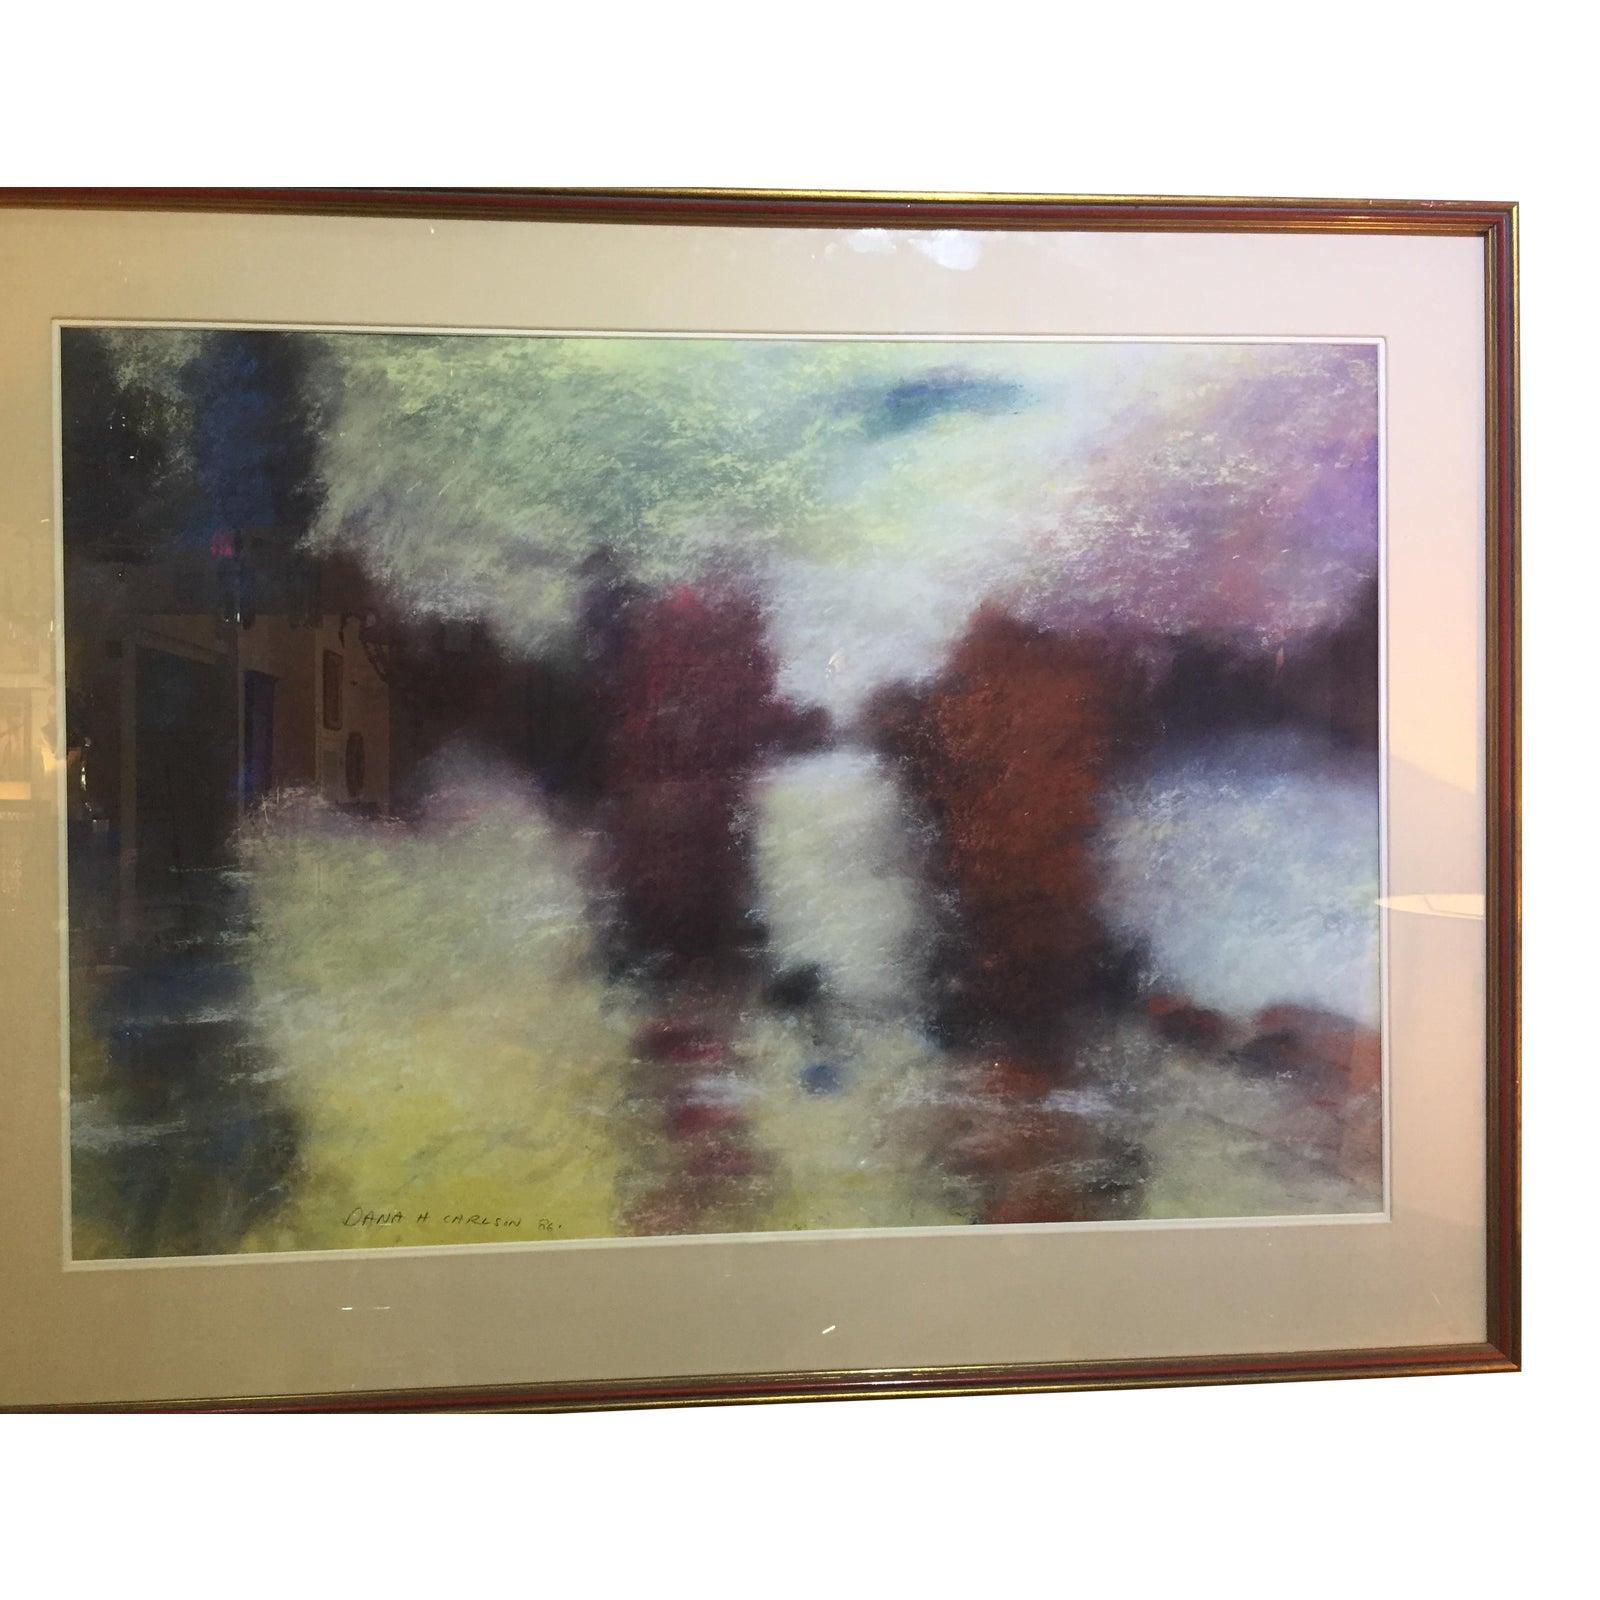 This beautiful and moody impressionist pastel painting of what seems to be a pastoral scene was created in 1986 by Dana H. Carlson.

Note: Image dimensions are 25